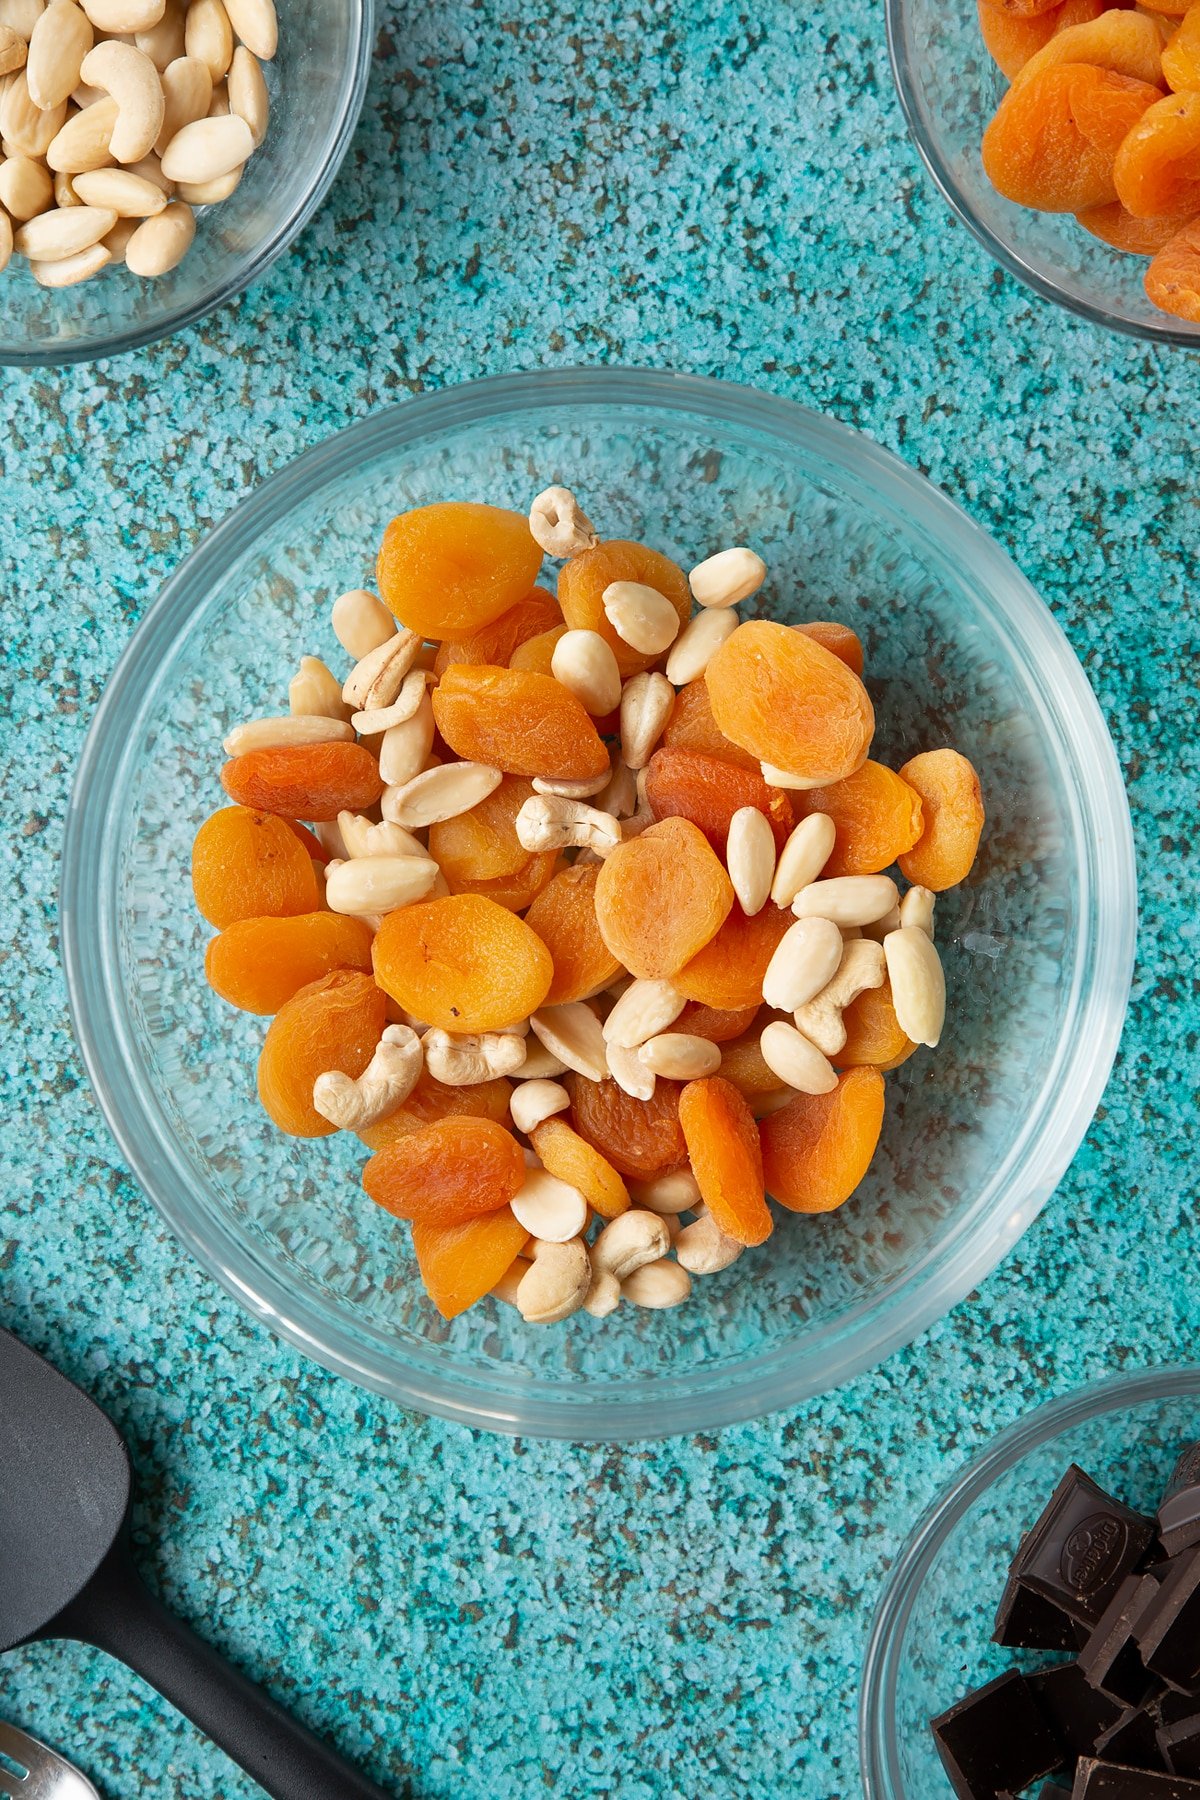 A mixing bowl containing blanched almonds, apricots and a few cashews. Ingredients to make chocolate apricot balls surround the ball.